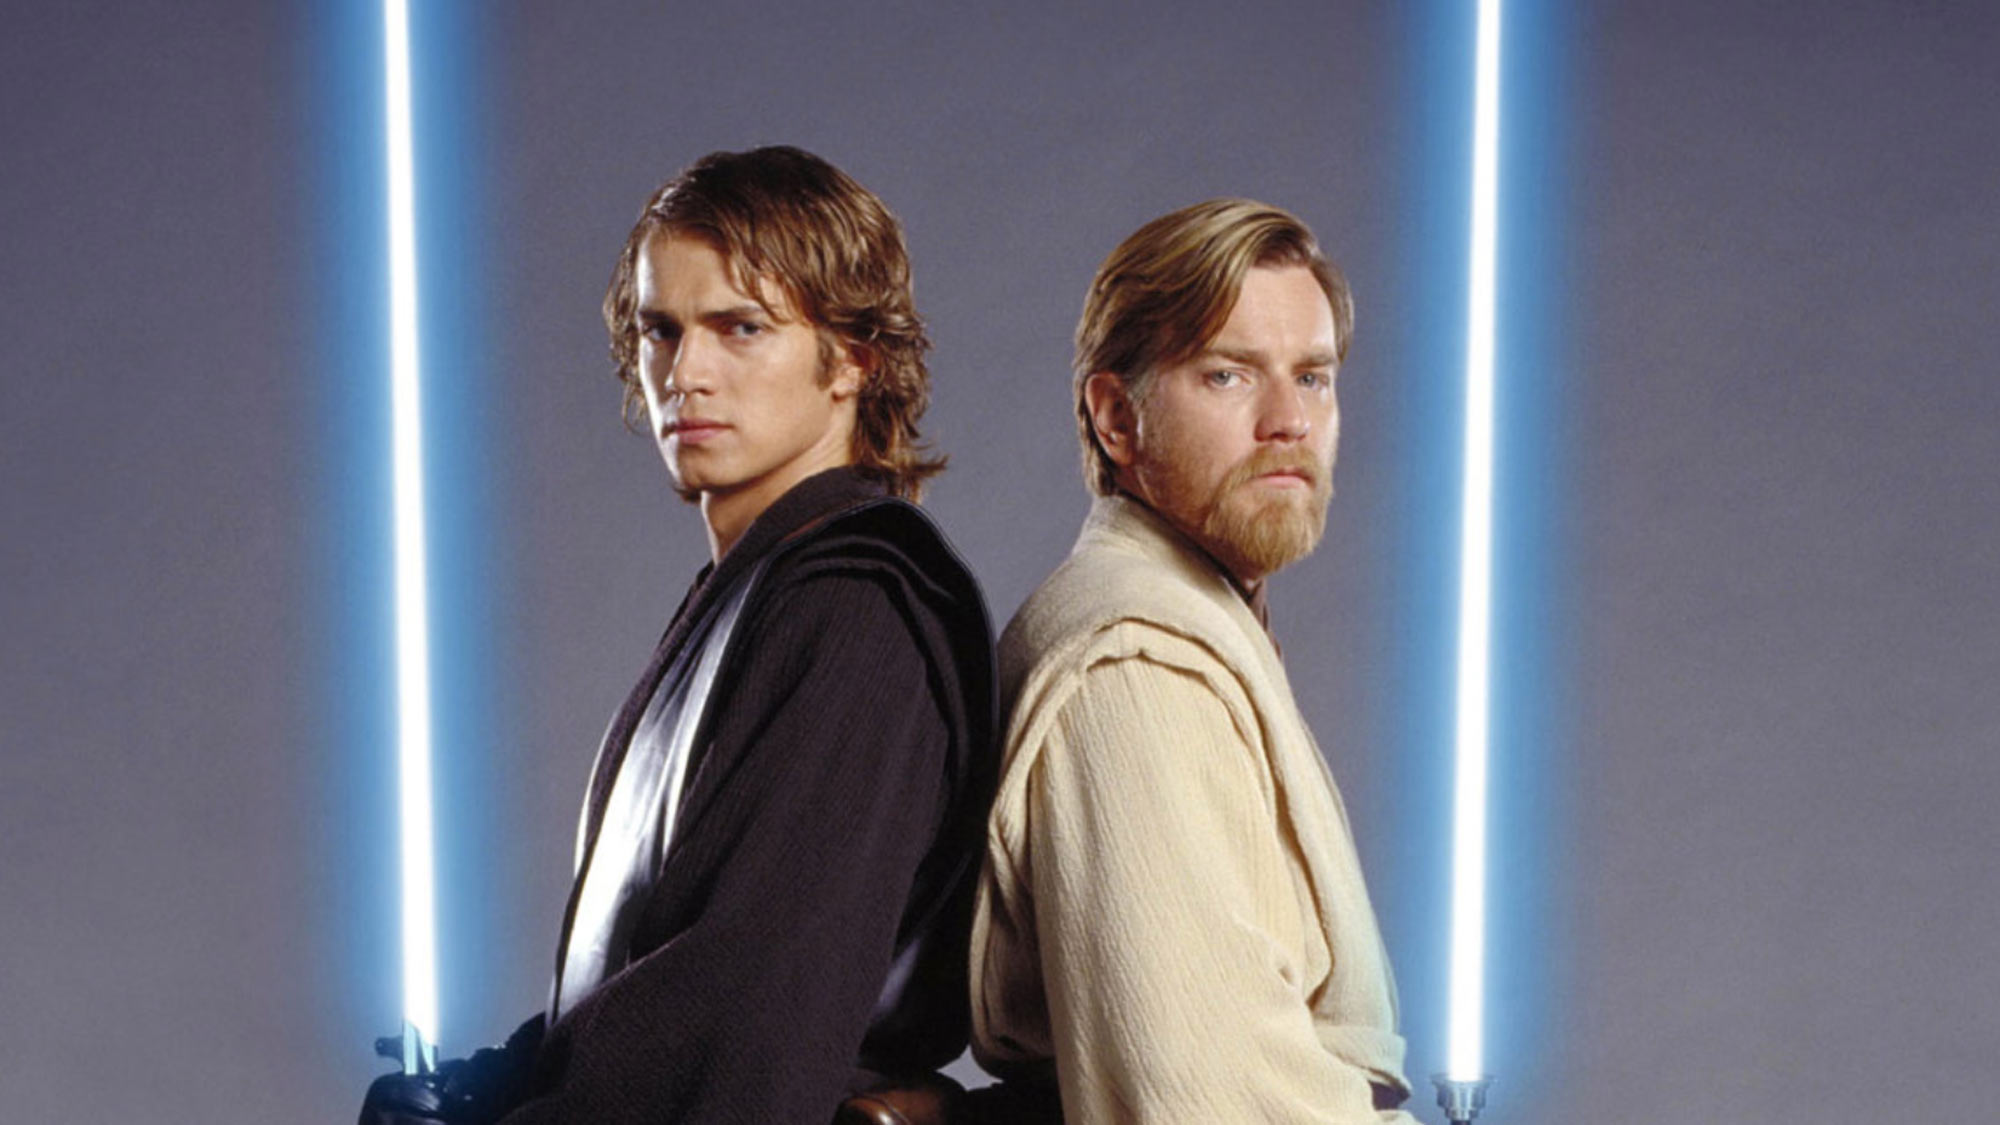 Obi-Wan Kenobi cast and character guide: Everything you need to know